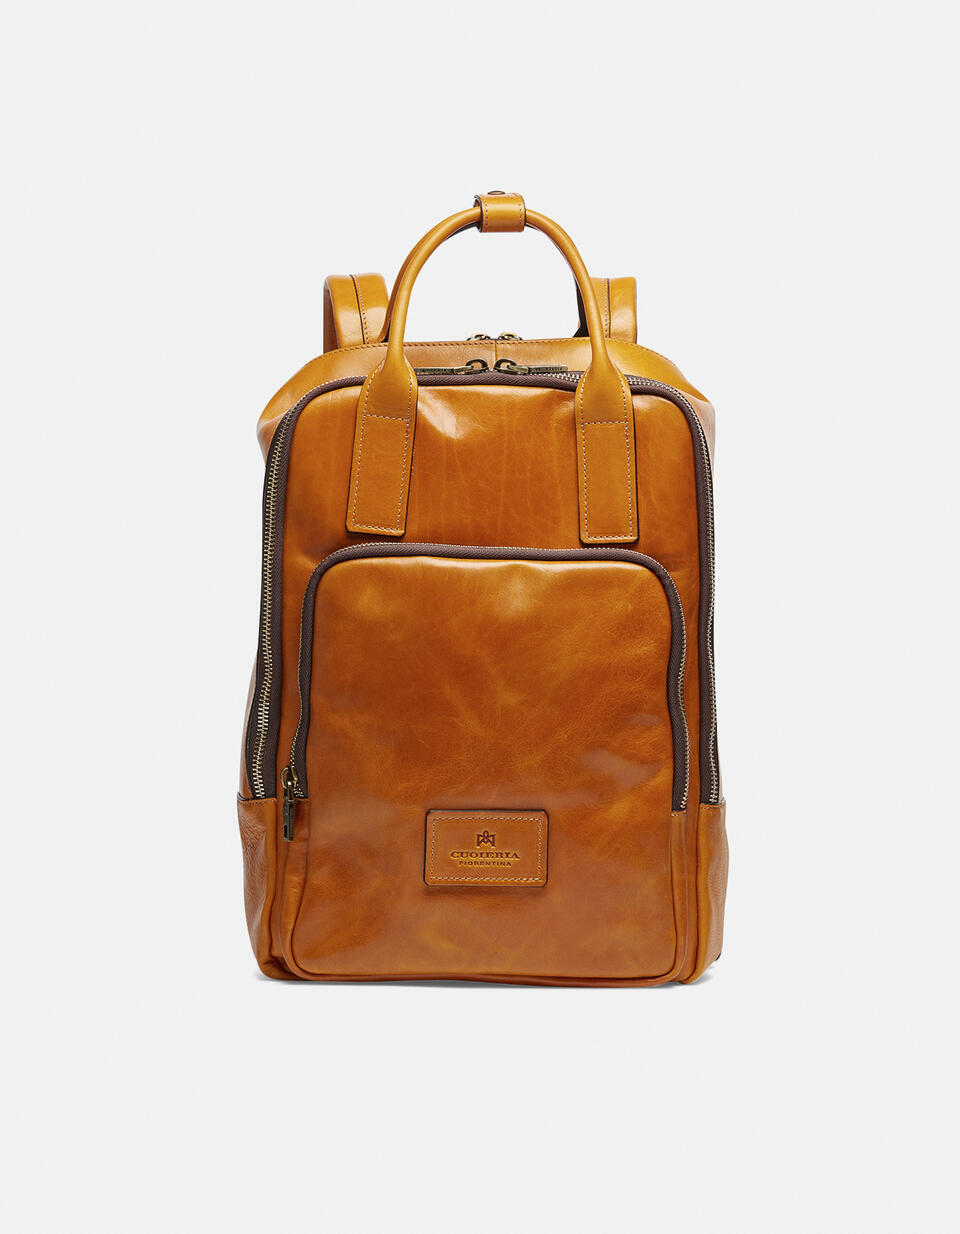 Tokio large backpack in soft leather - Backpacks - MEN'S BAGS | bags  - Backpacks - MEN'S BAGS | bagsCuoieria Fiorentina